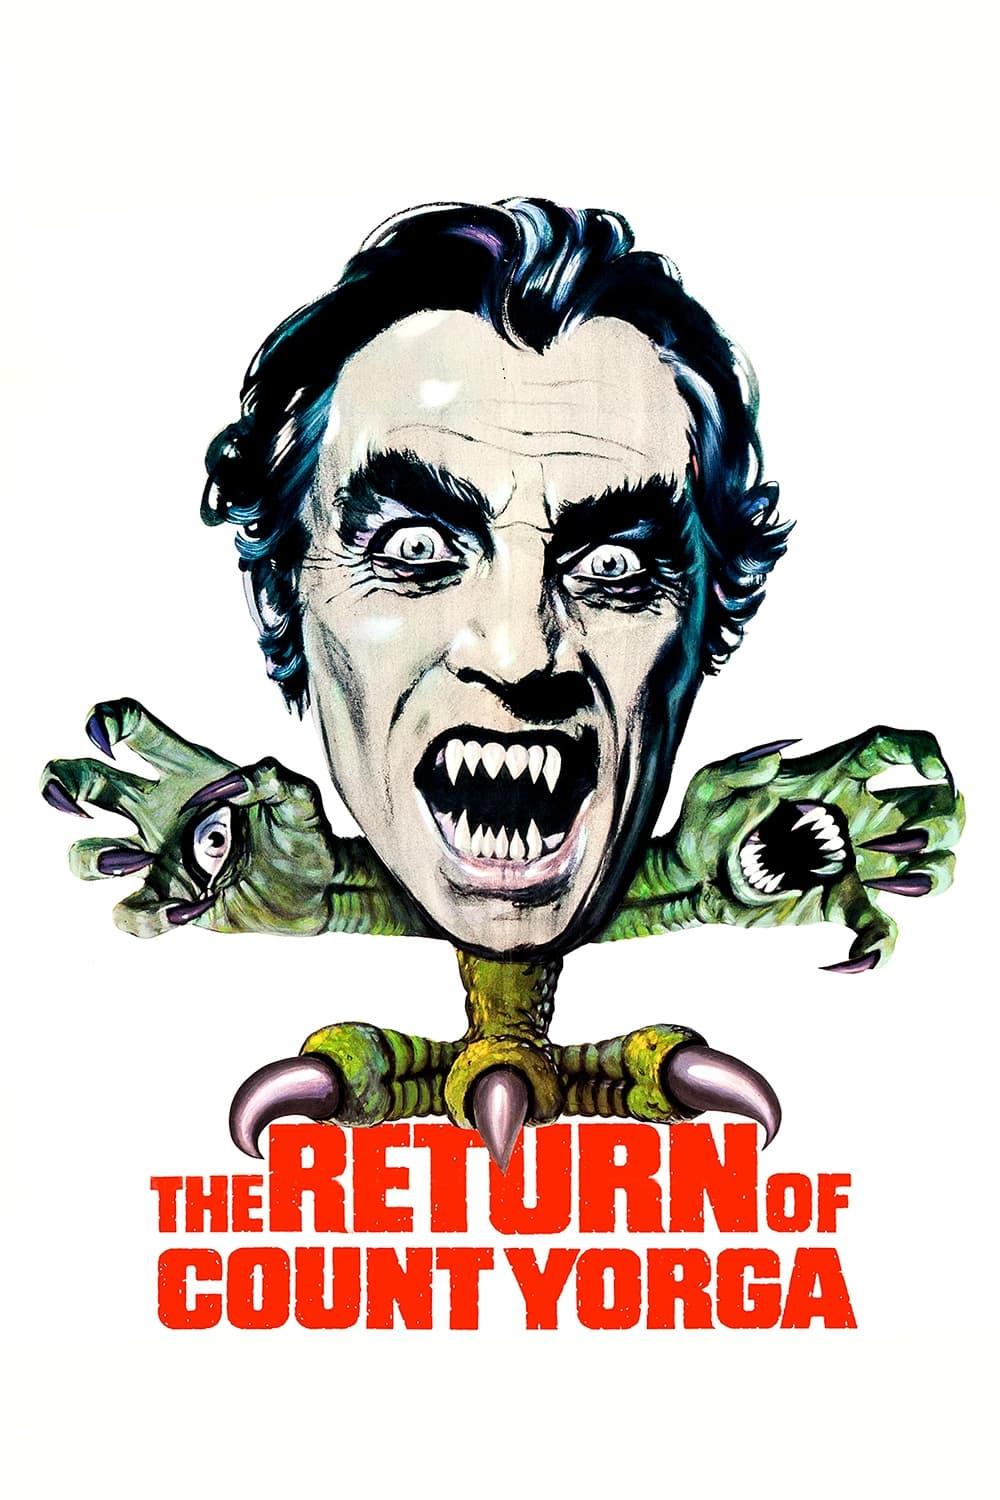 The Return of Count Yorga poster